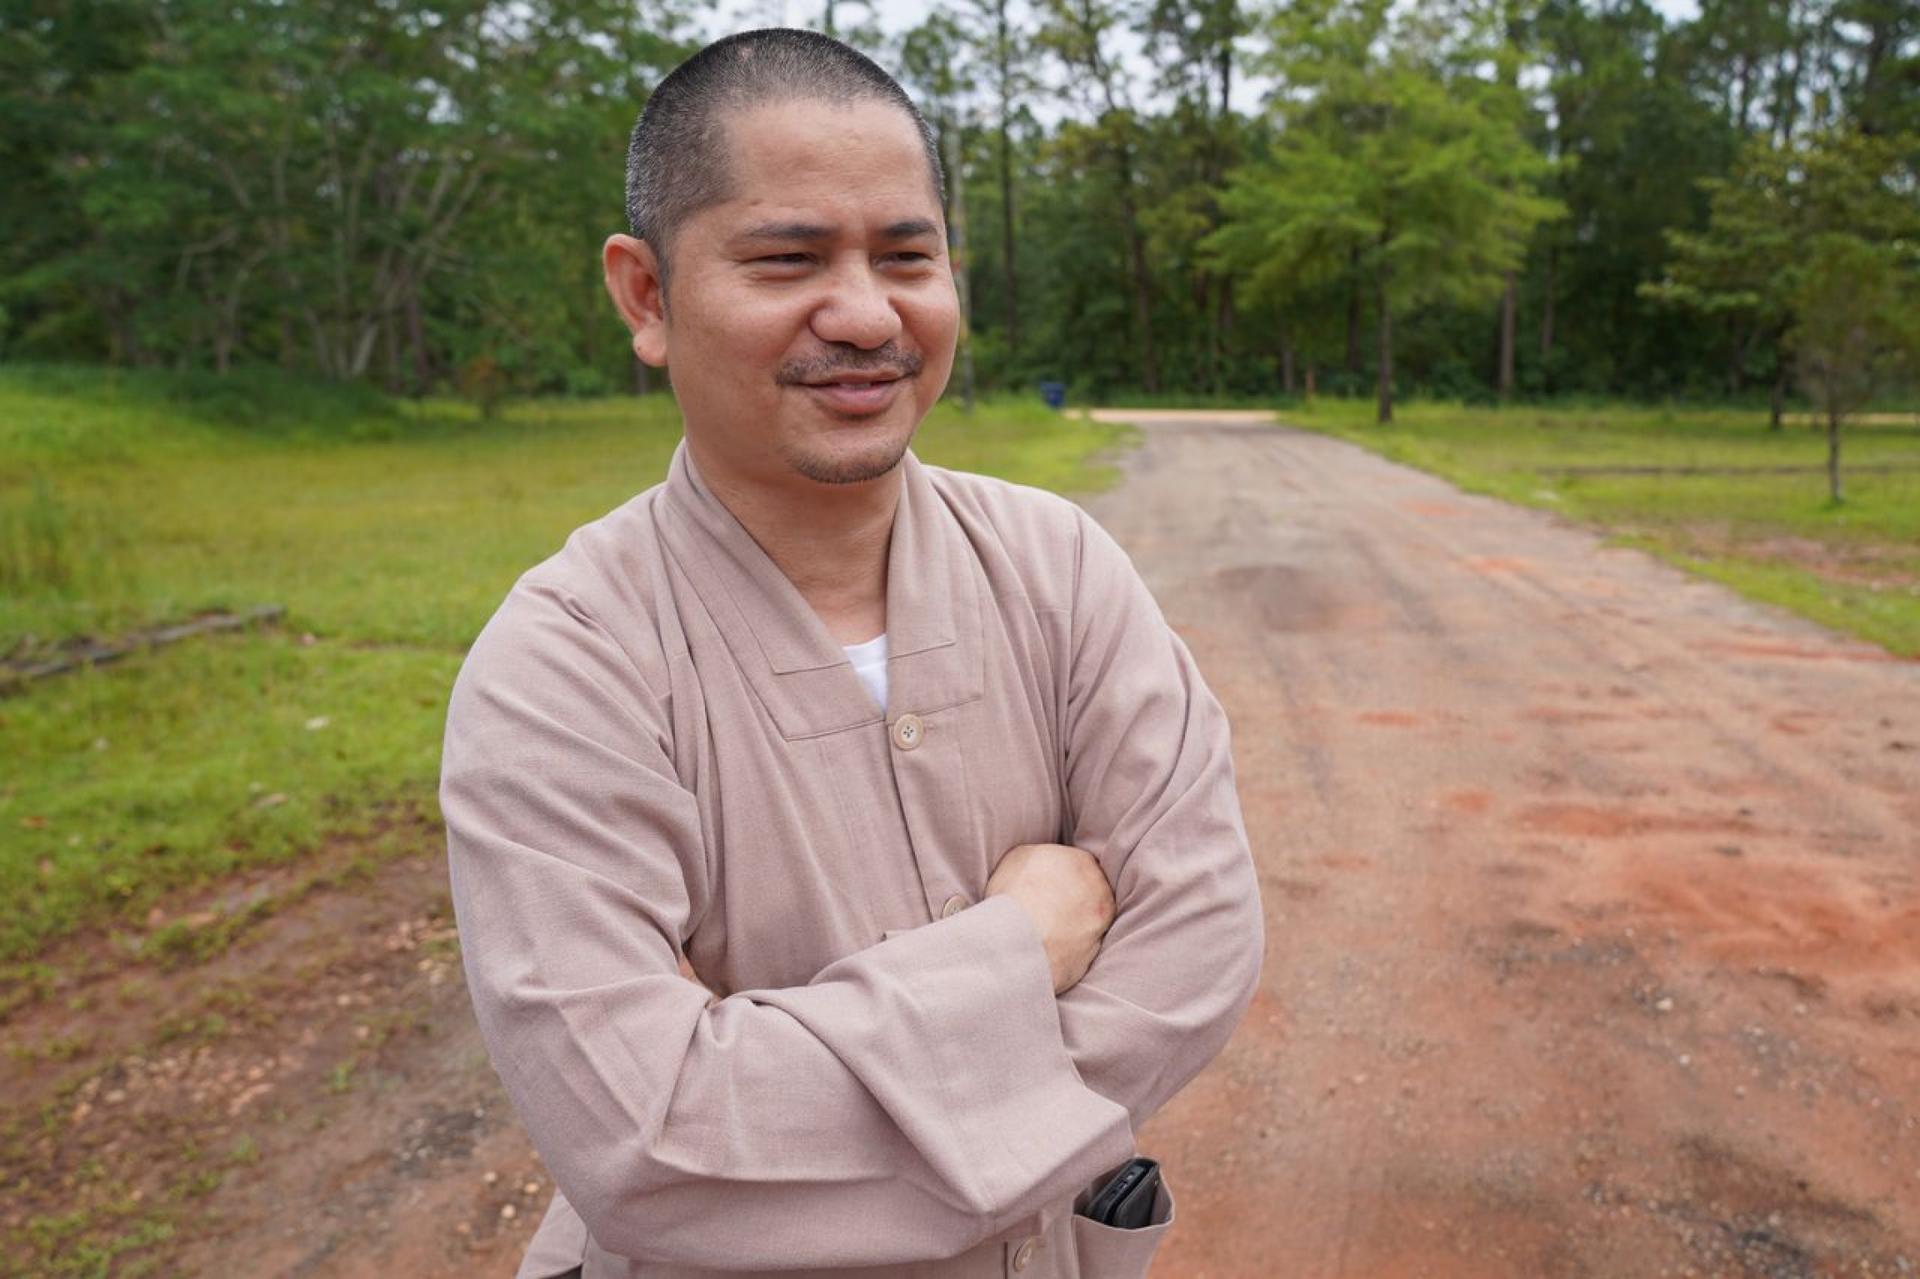 A man smiles while standing with his arms folded